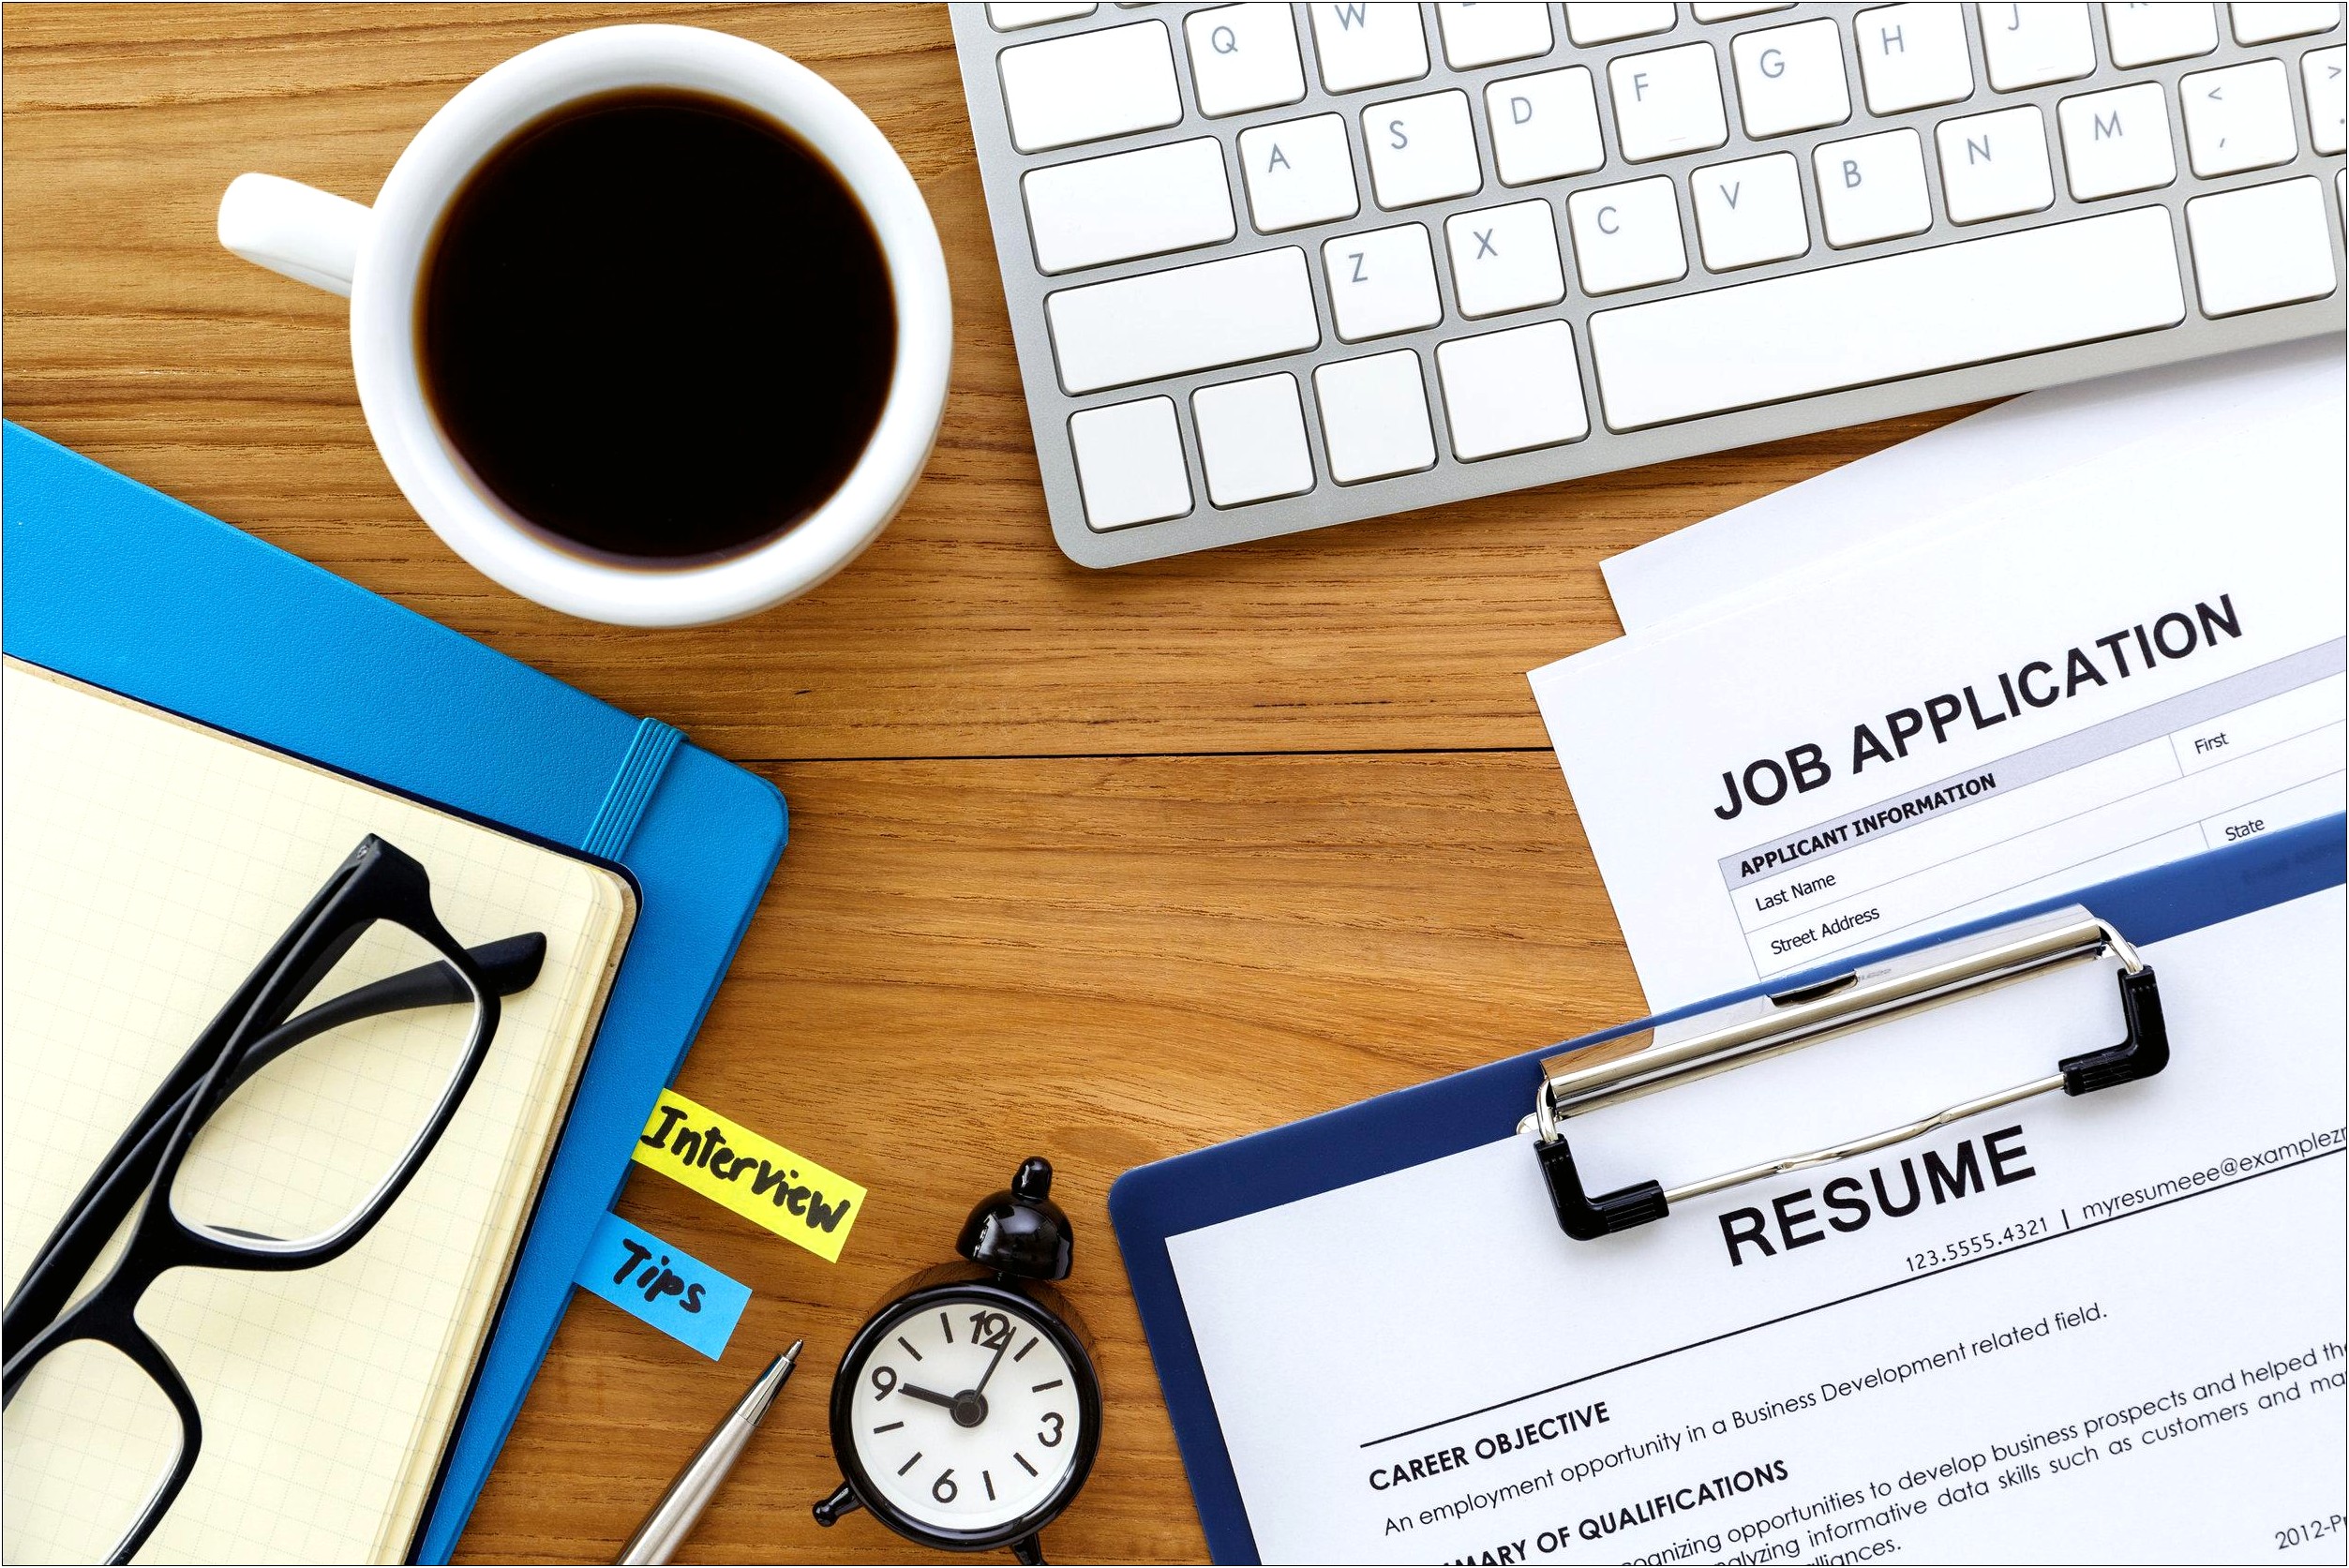 The Resume Job Search & Interview Guide